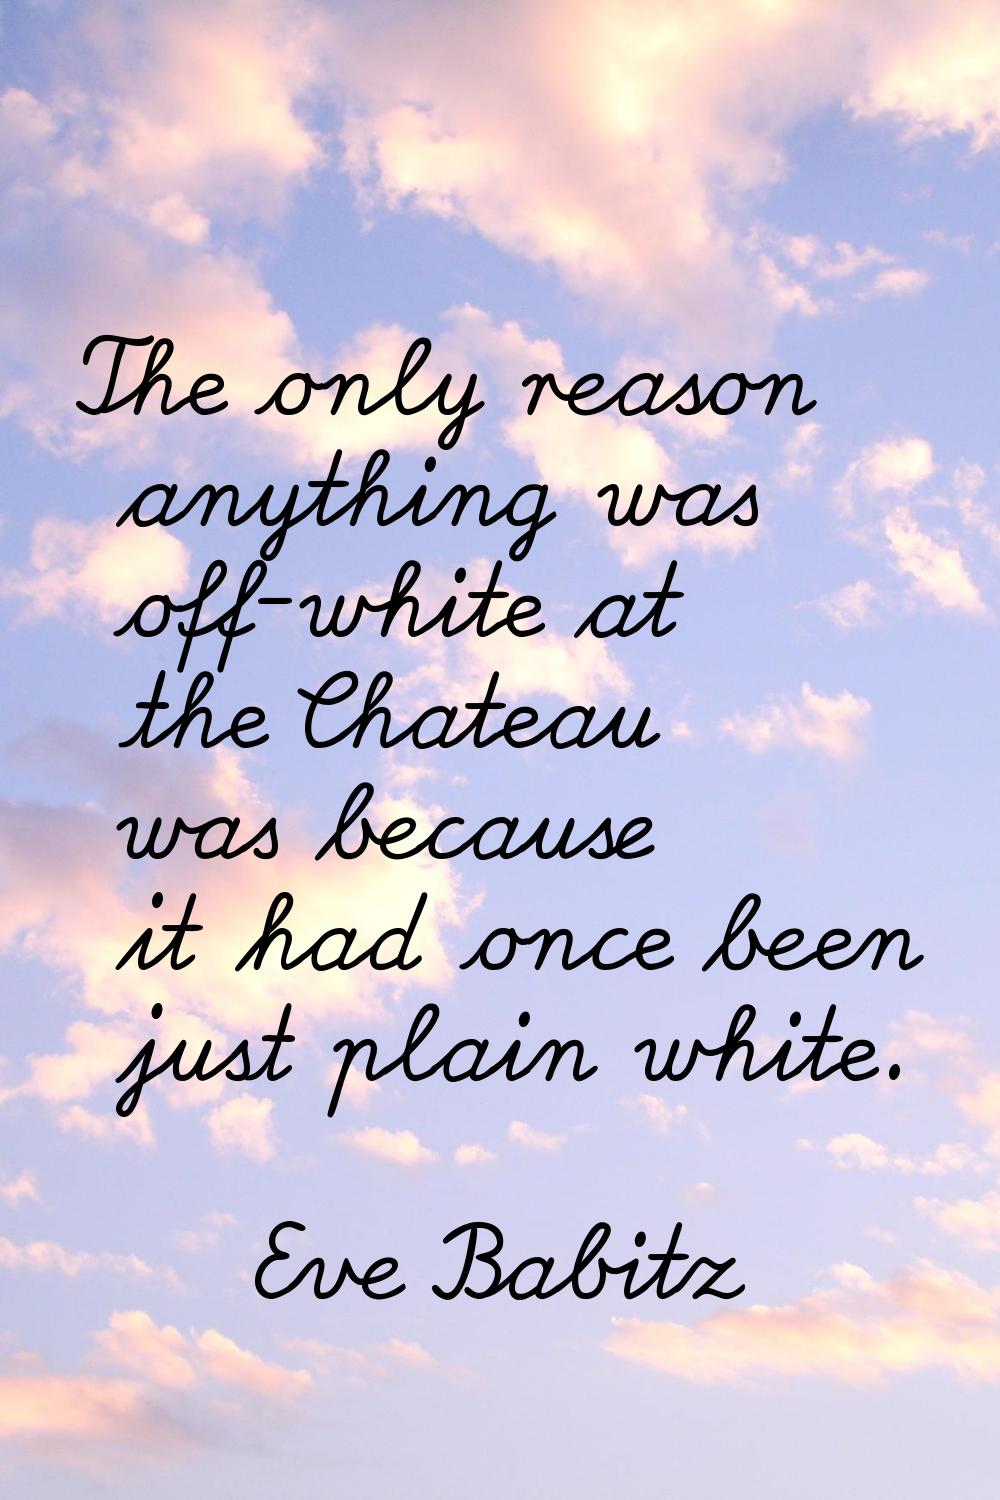 The only reason anything was off-white at the Chateau was because it had once been just plain white